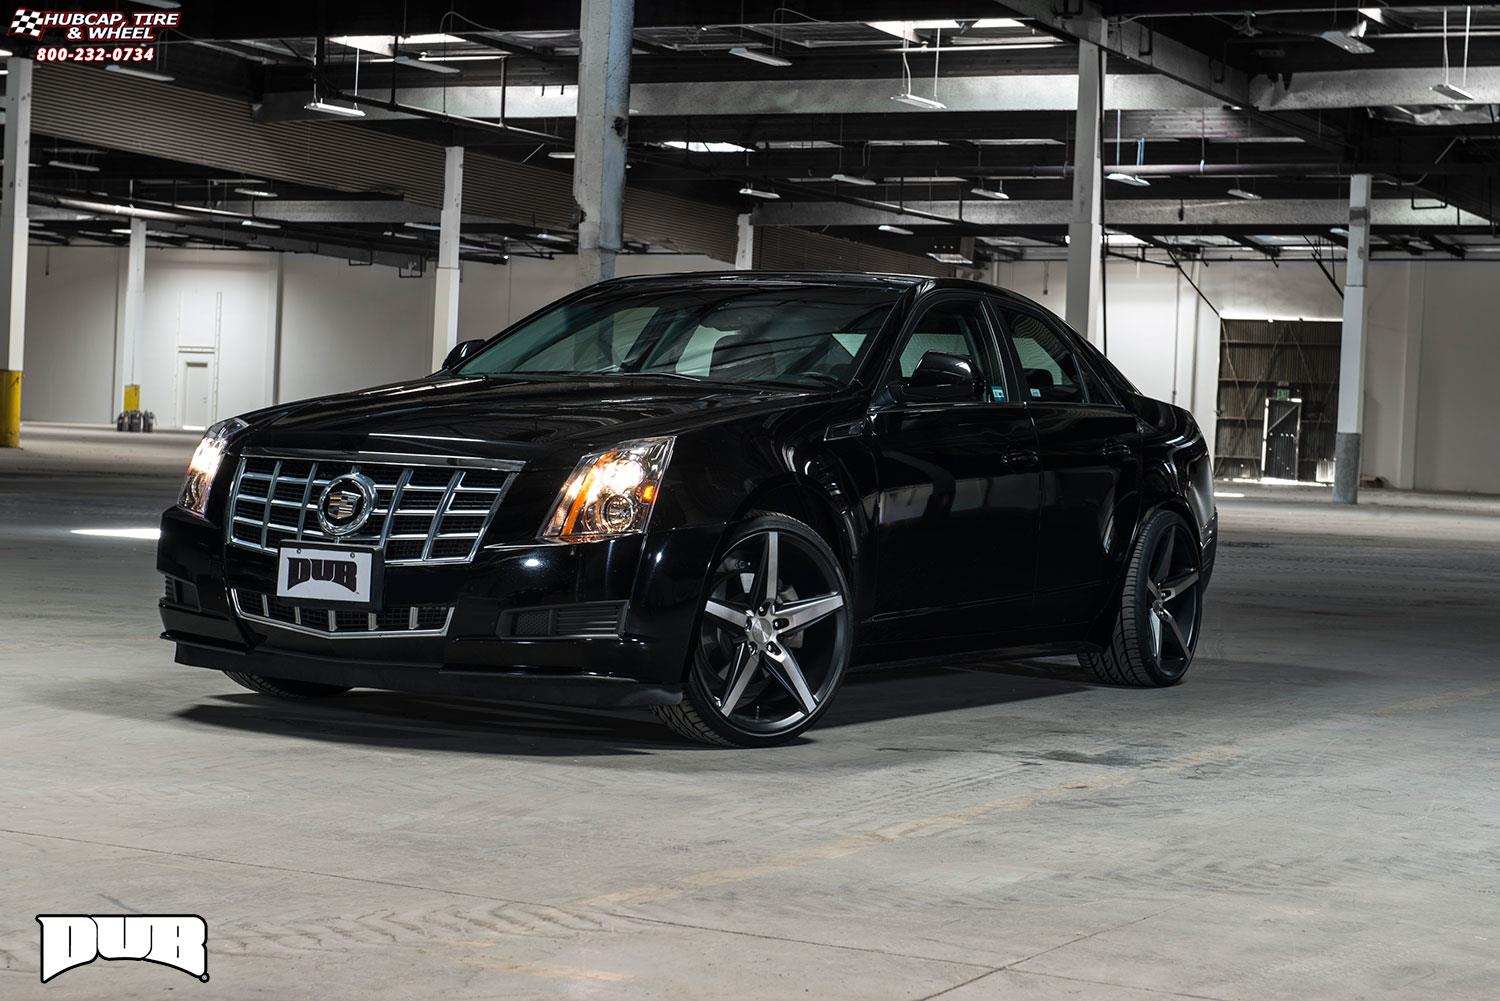 Cadillac CTS Dub Lace - S119 Wheels Black & Machined with Dark Tint